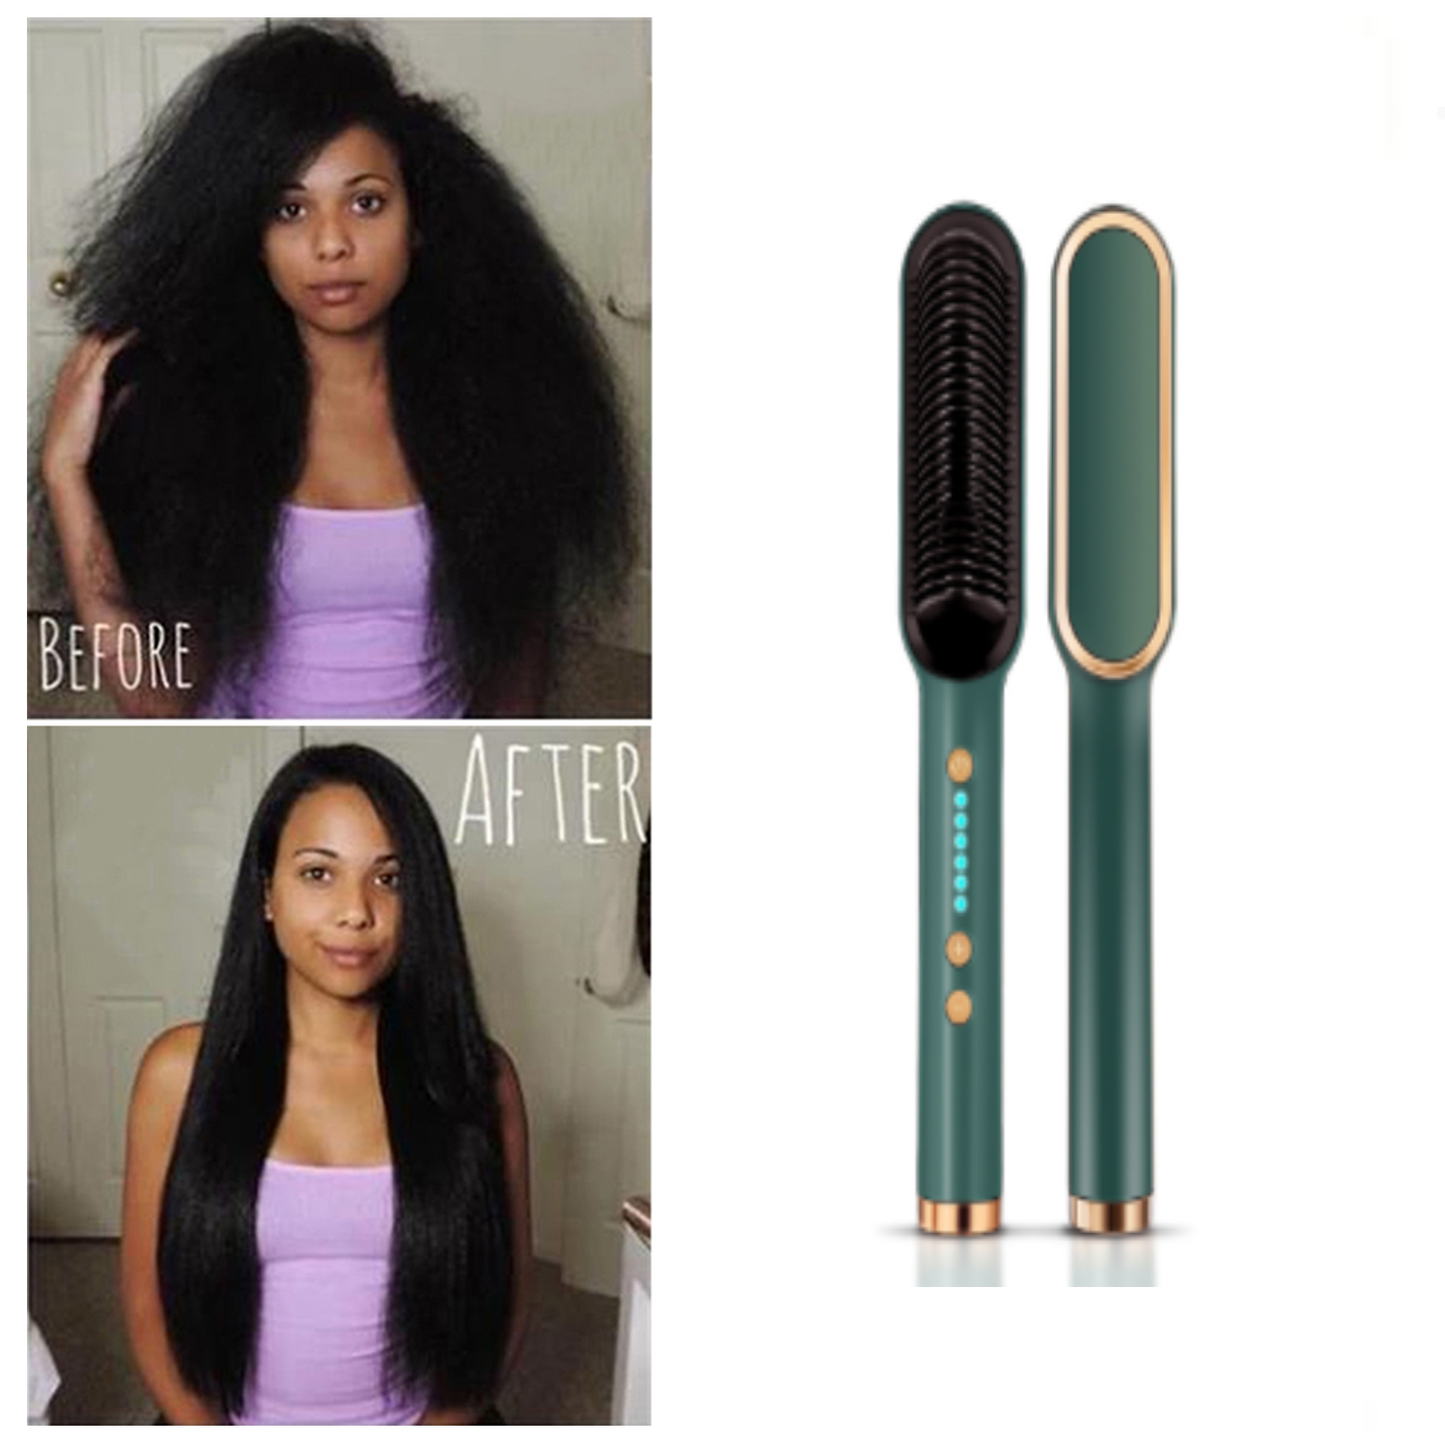 Negative Ion Straightener Styling Comb